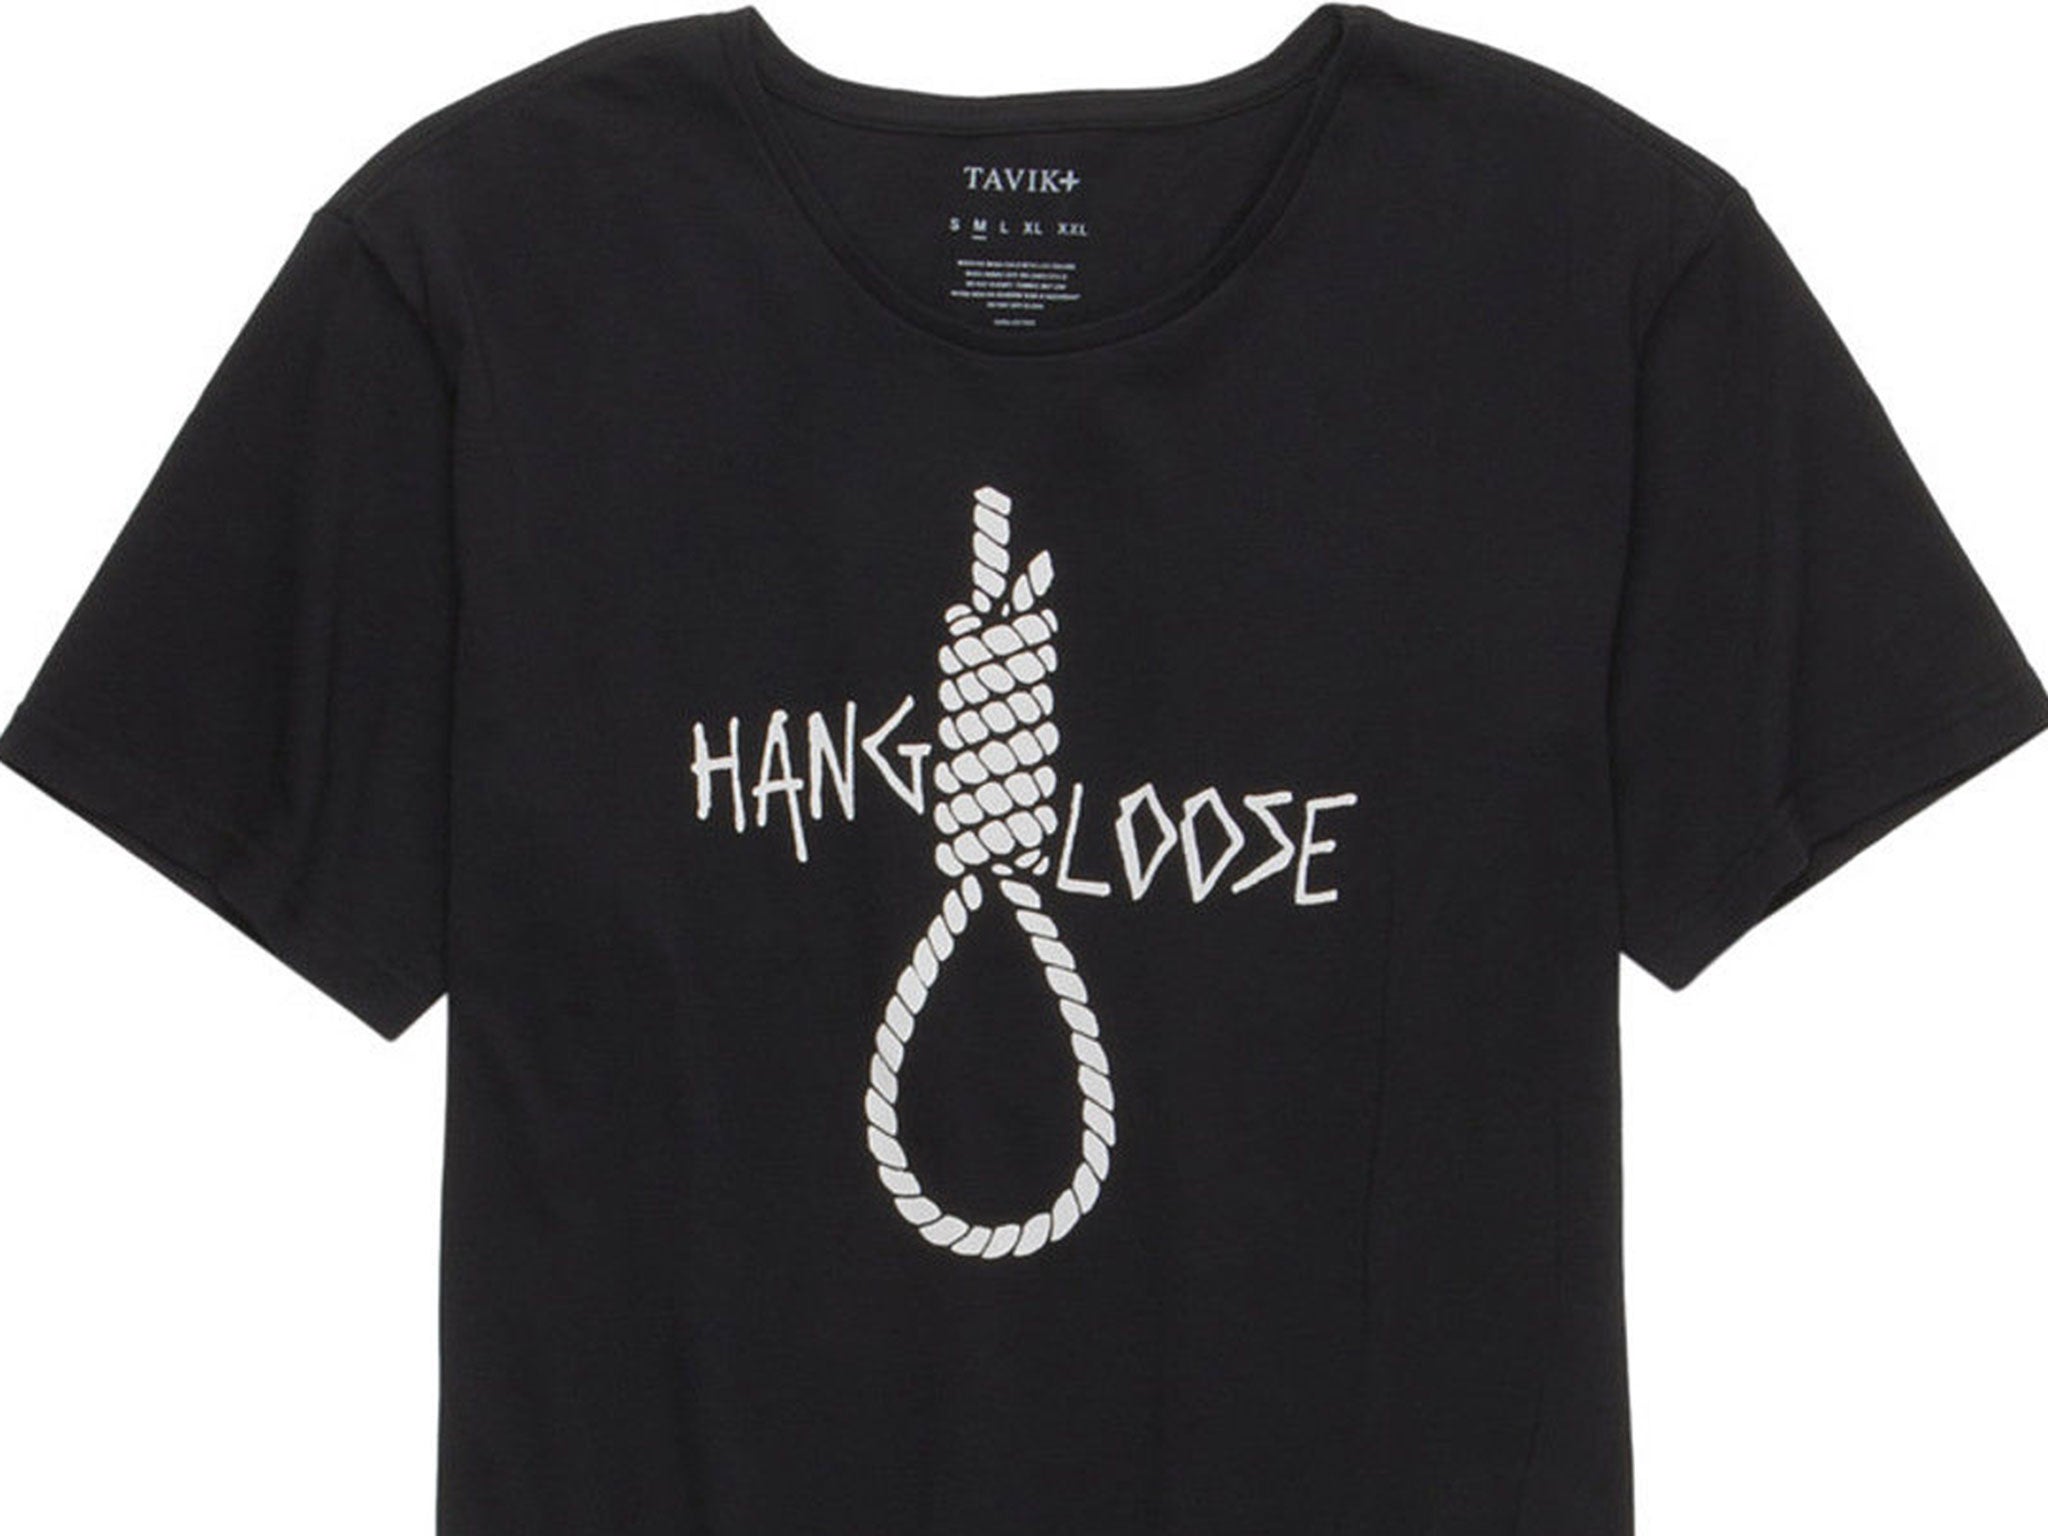 The T-shirt sparked comparisons to racist lynchings on social media